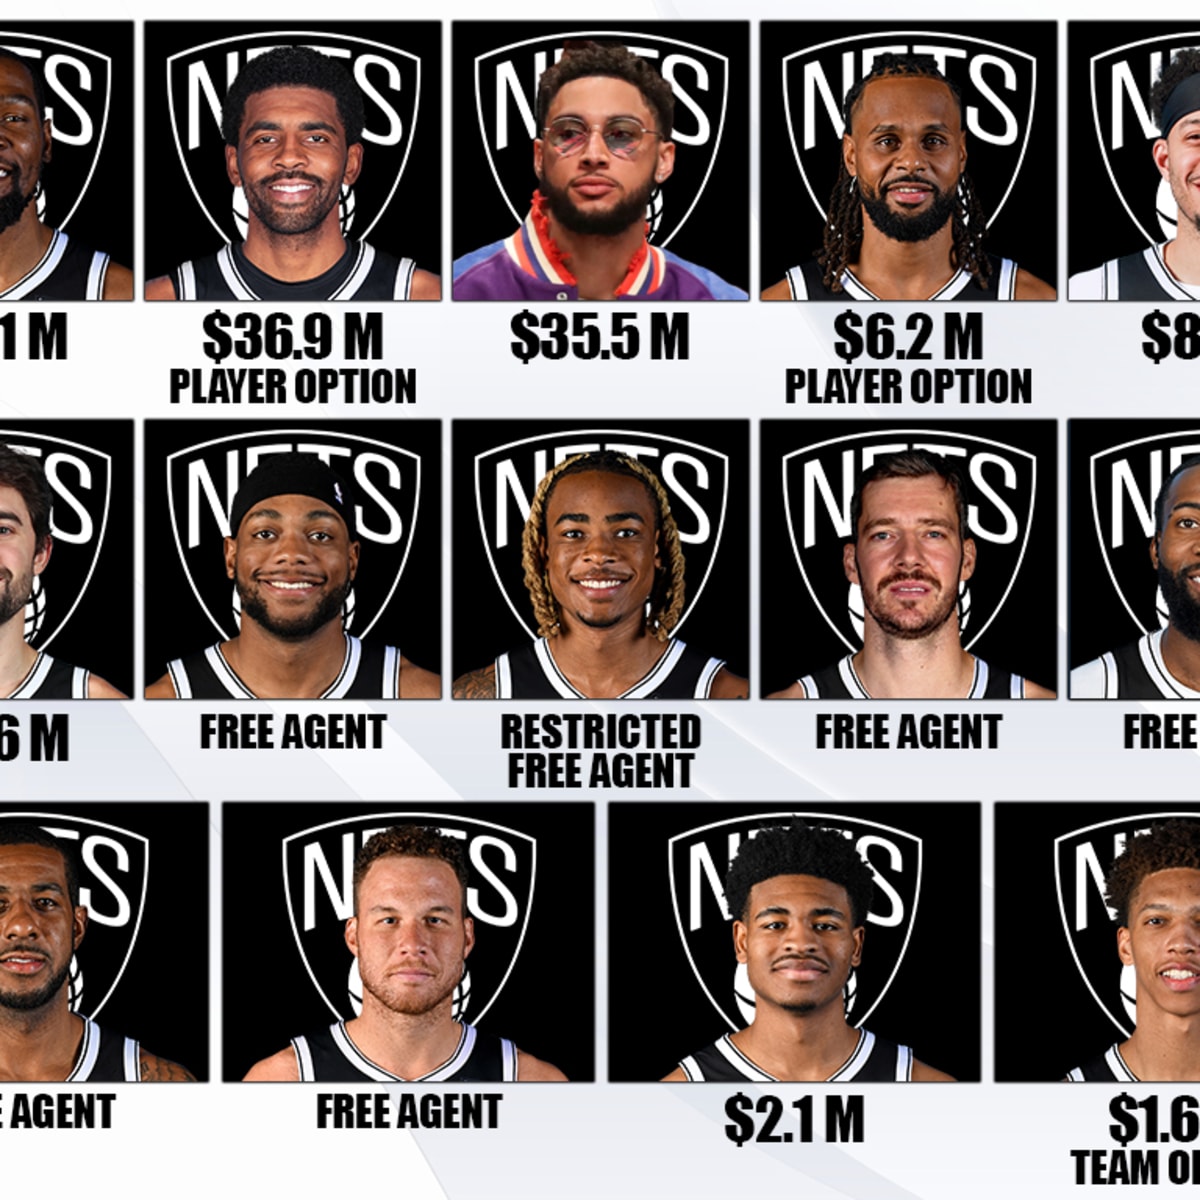 The Brooklyn Nets Potential Starting Lineup: NBA Championship Is